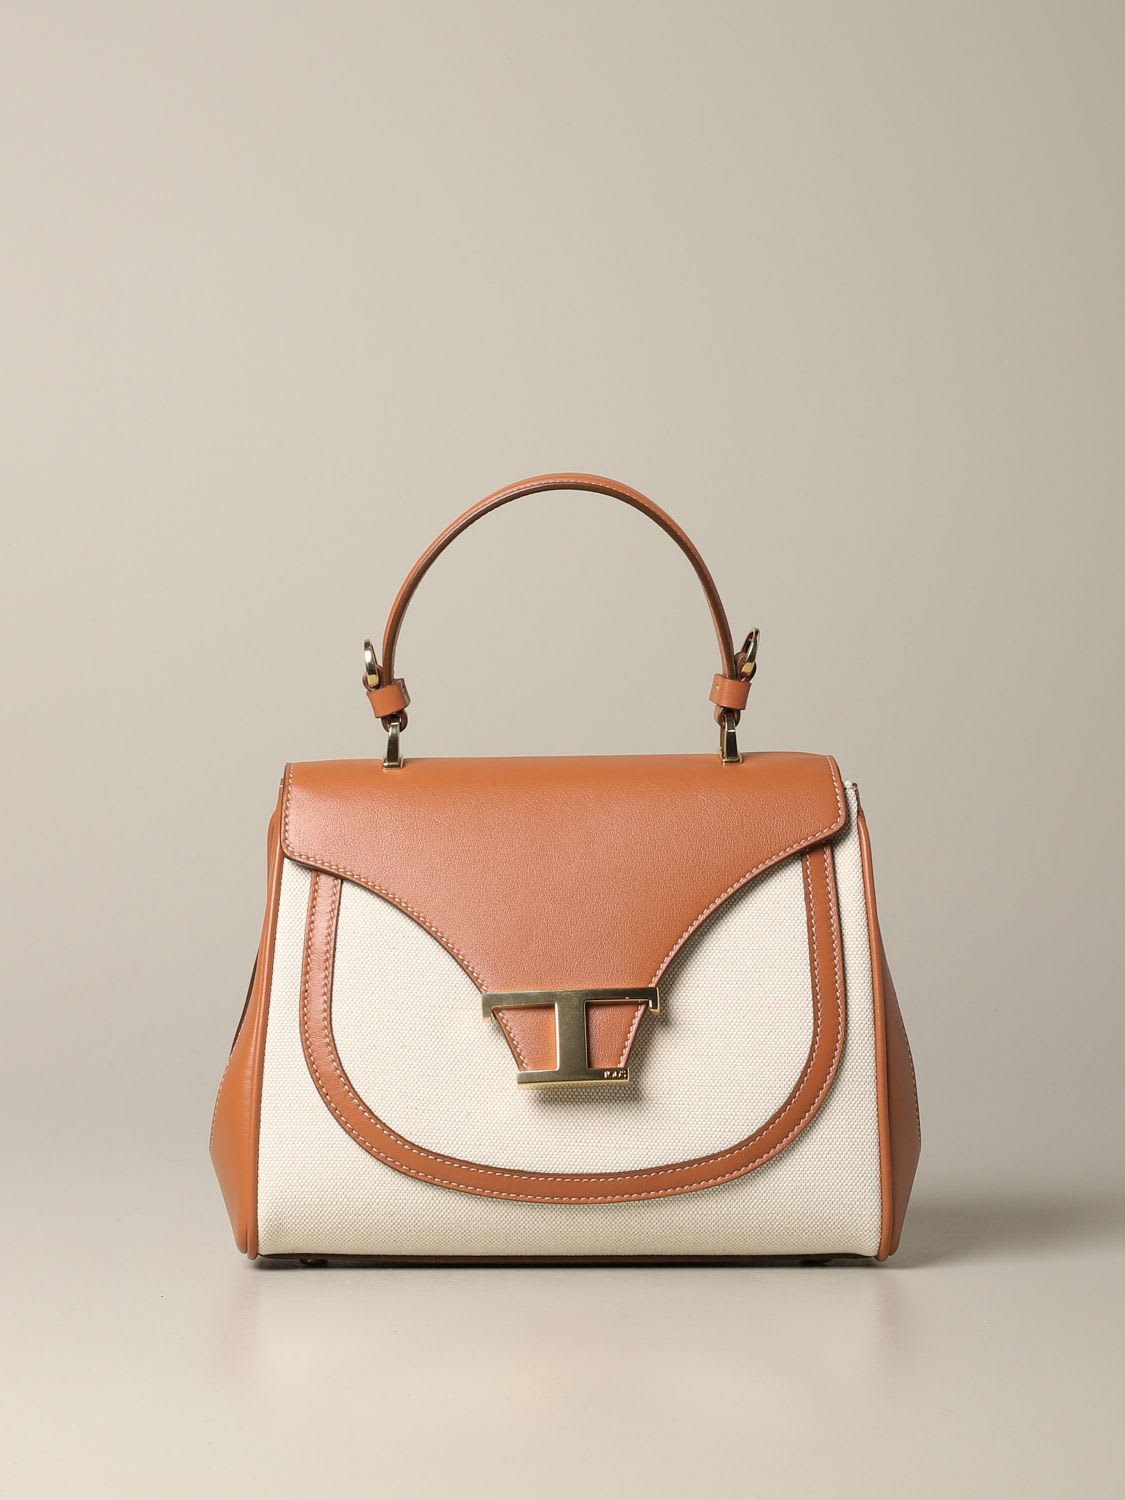 tods bag sale